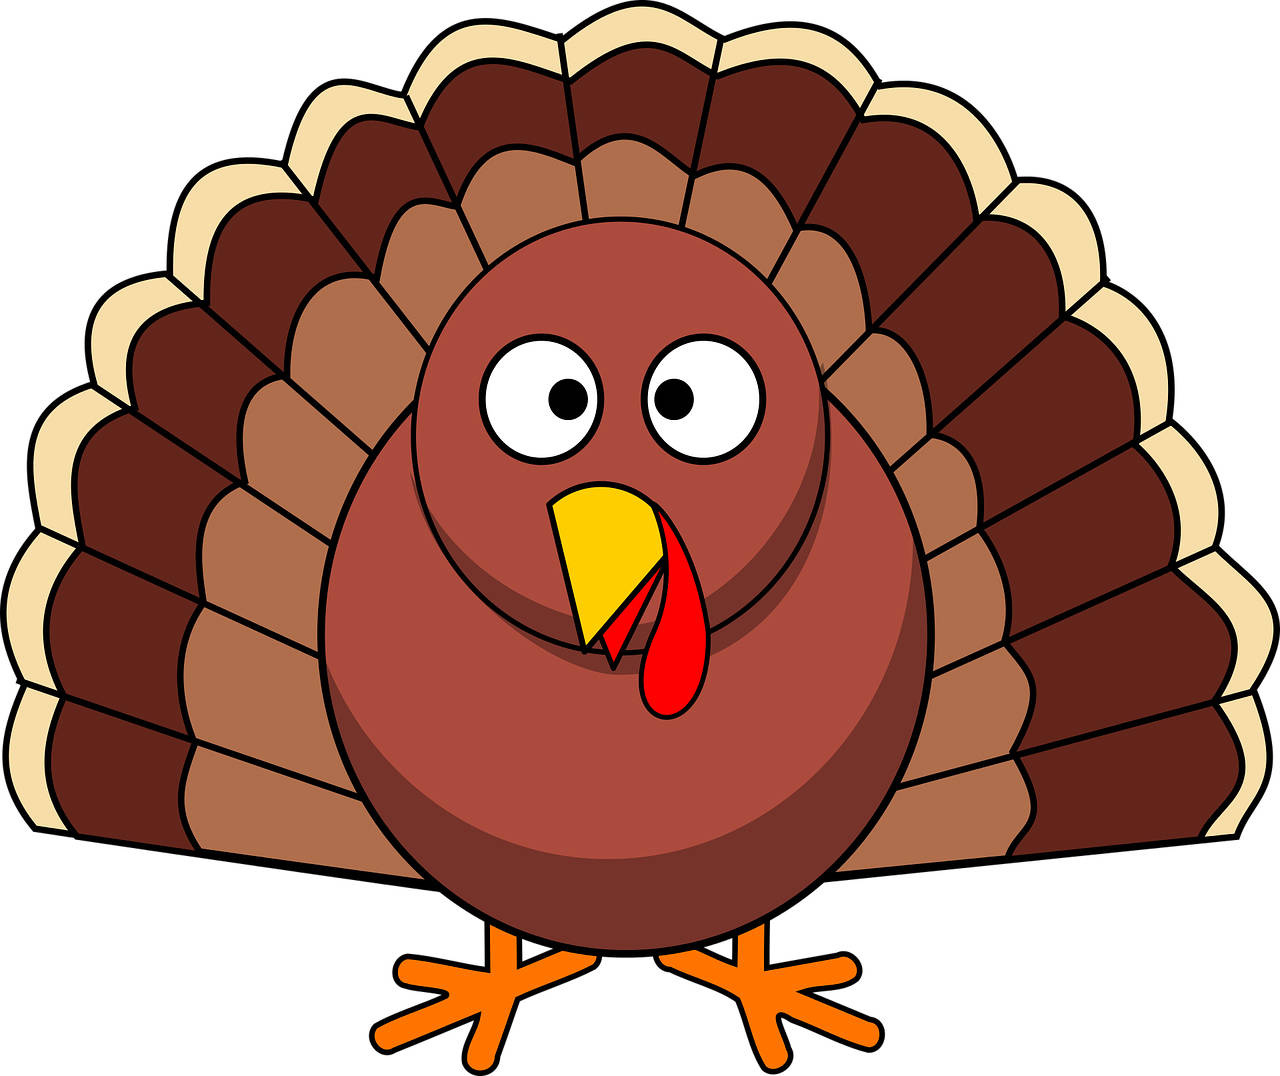 Turkey Pic Blank Template - Imgflip Within Blank Turkey Template